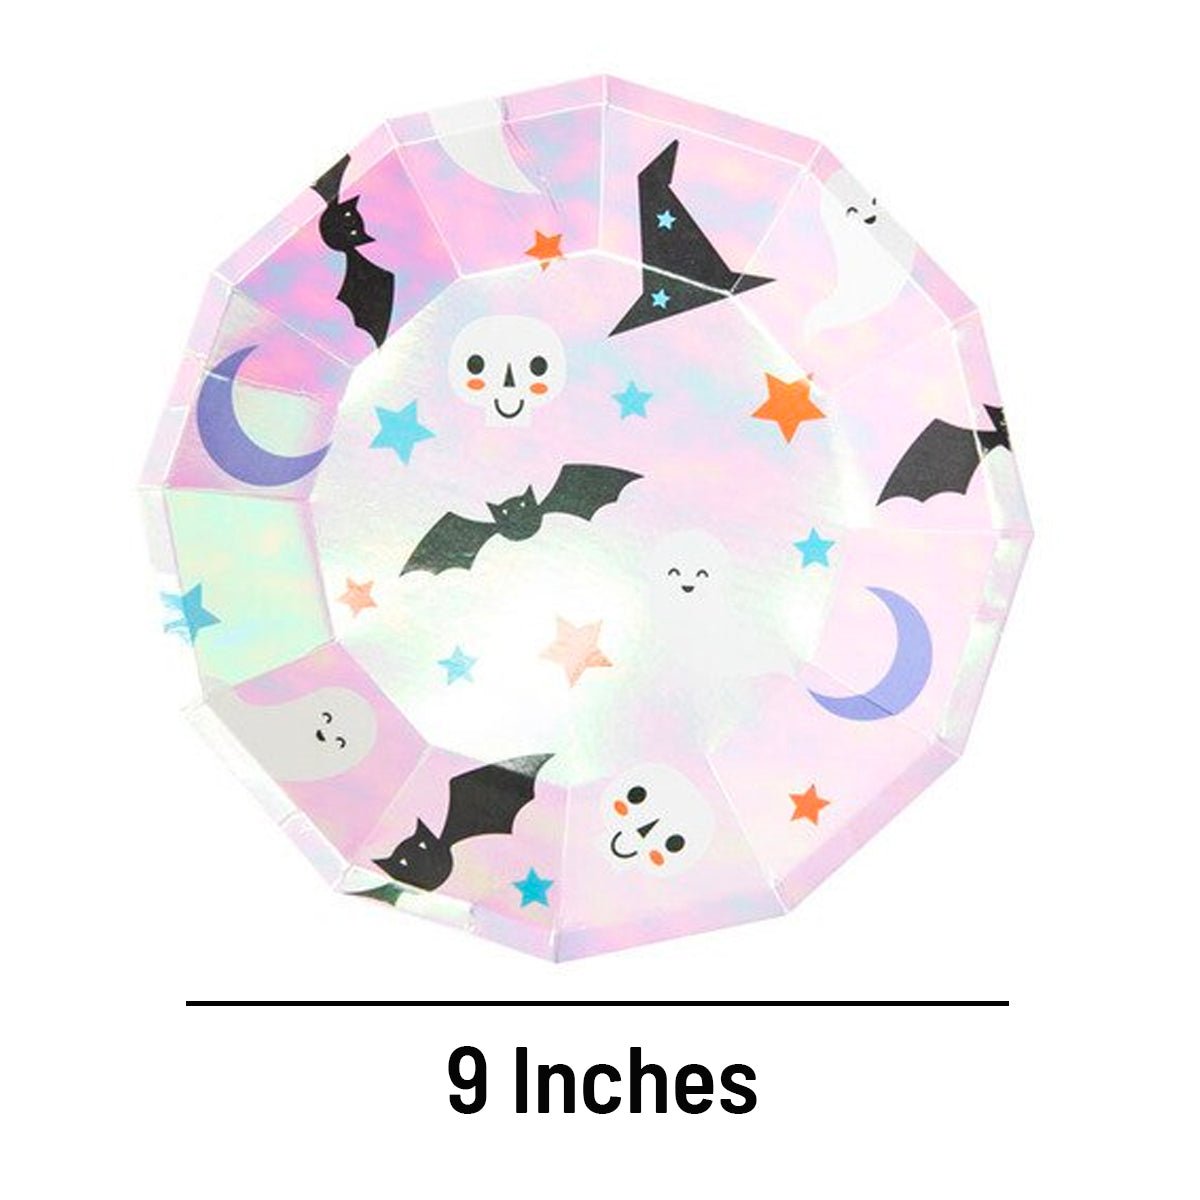 Cute Iridescent Shaped Halloween Icon Plates (Set of 8) - Ellie's Party Supply